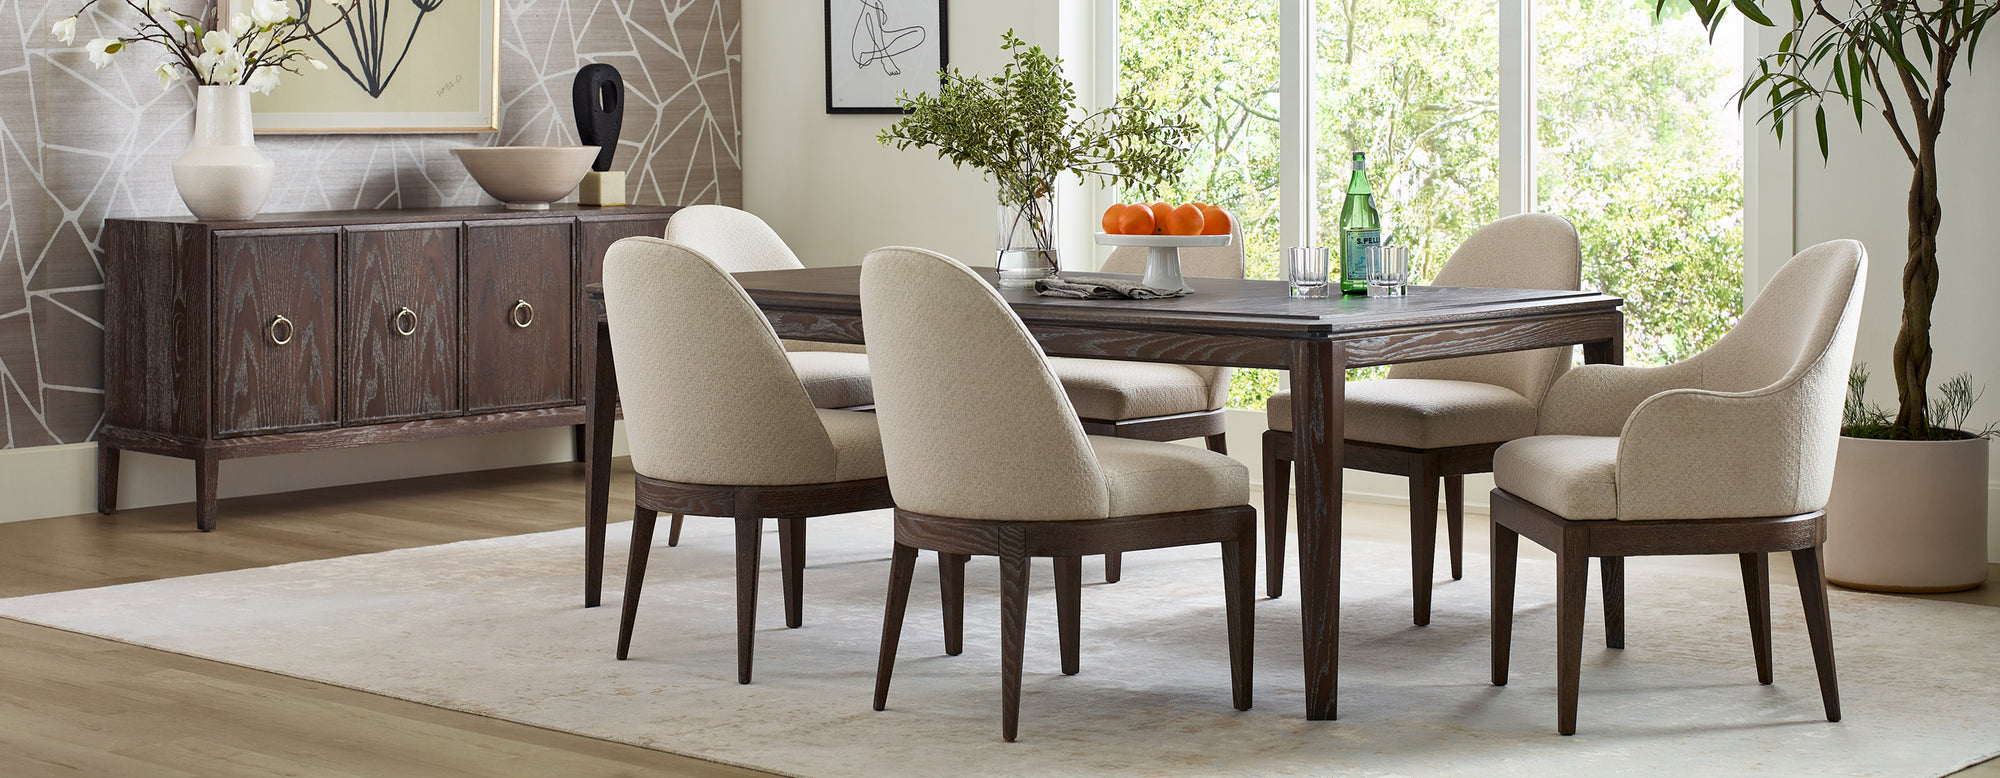 A Maidstone Rectangular Dining Table is in the middle of a brightly lit room surrounded by two Maidstone Upholstered Arm Chalirs and four Maidstone Upholstered Side Chairs. There is a Maidstone Four-Door Server in 202 Pier in the background.